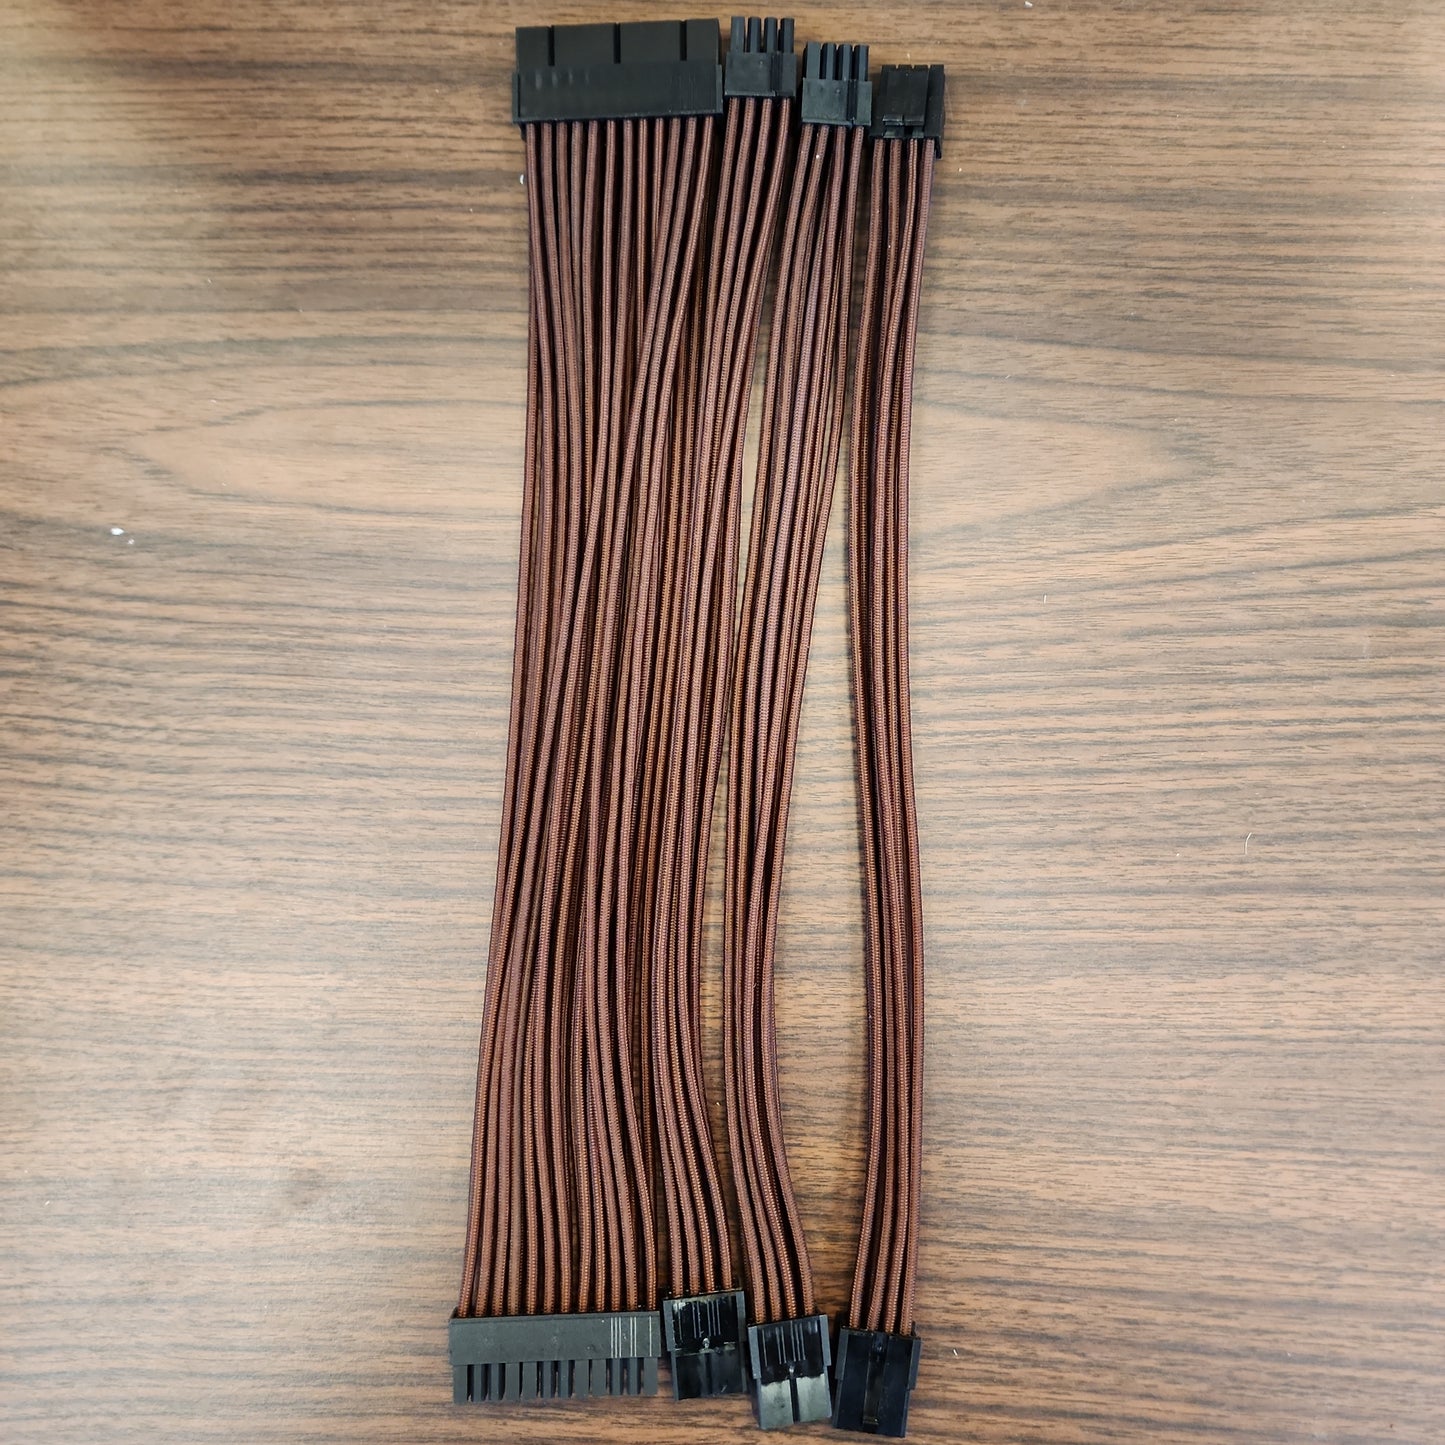 PSU Cable Extension Kit